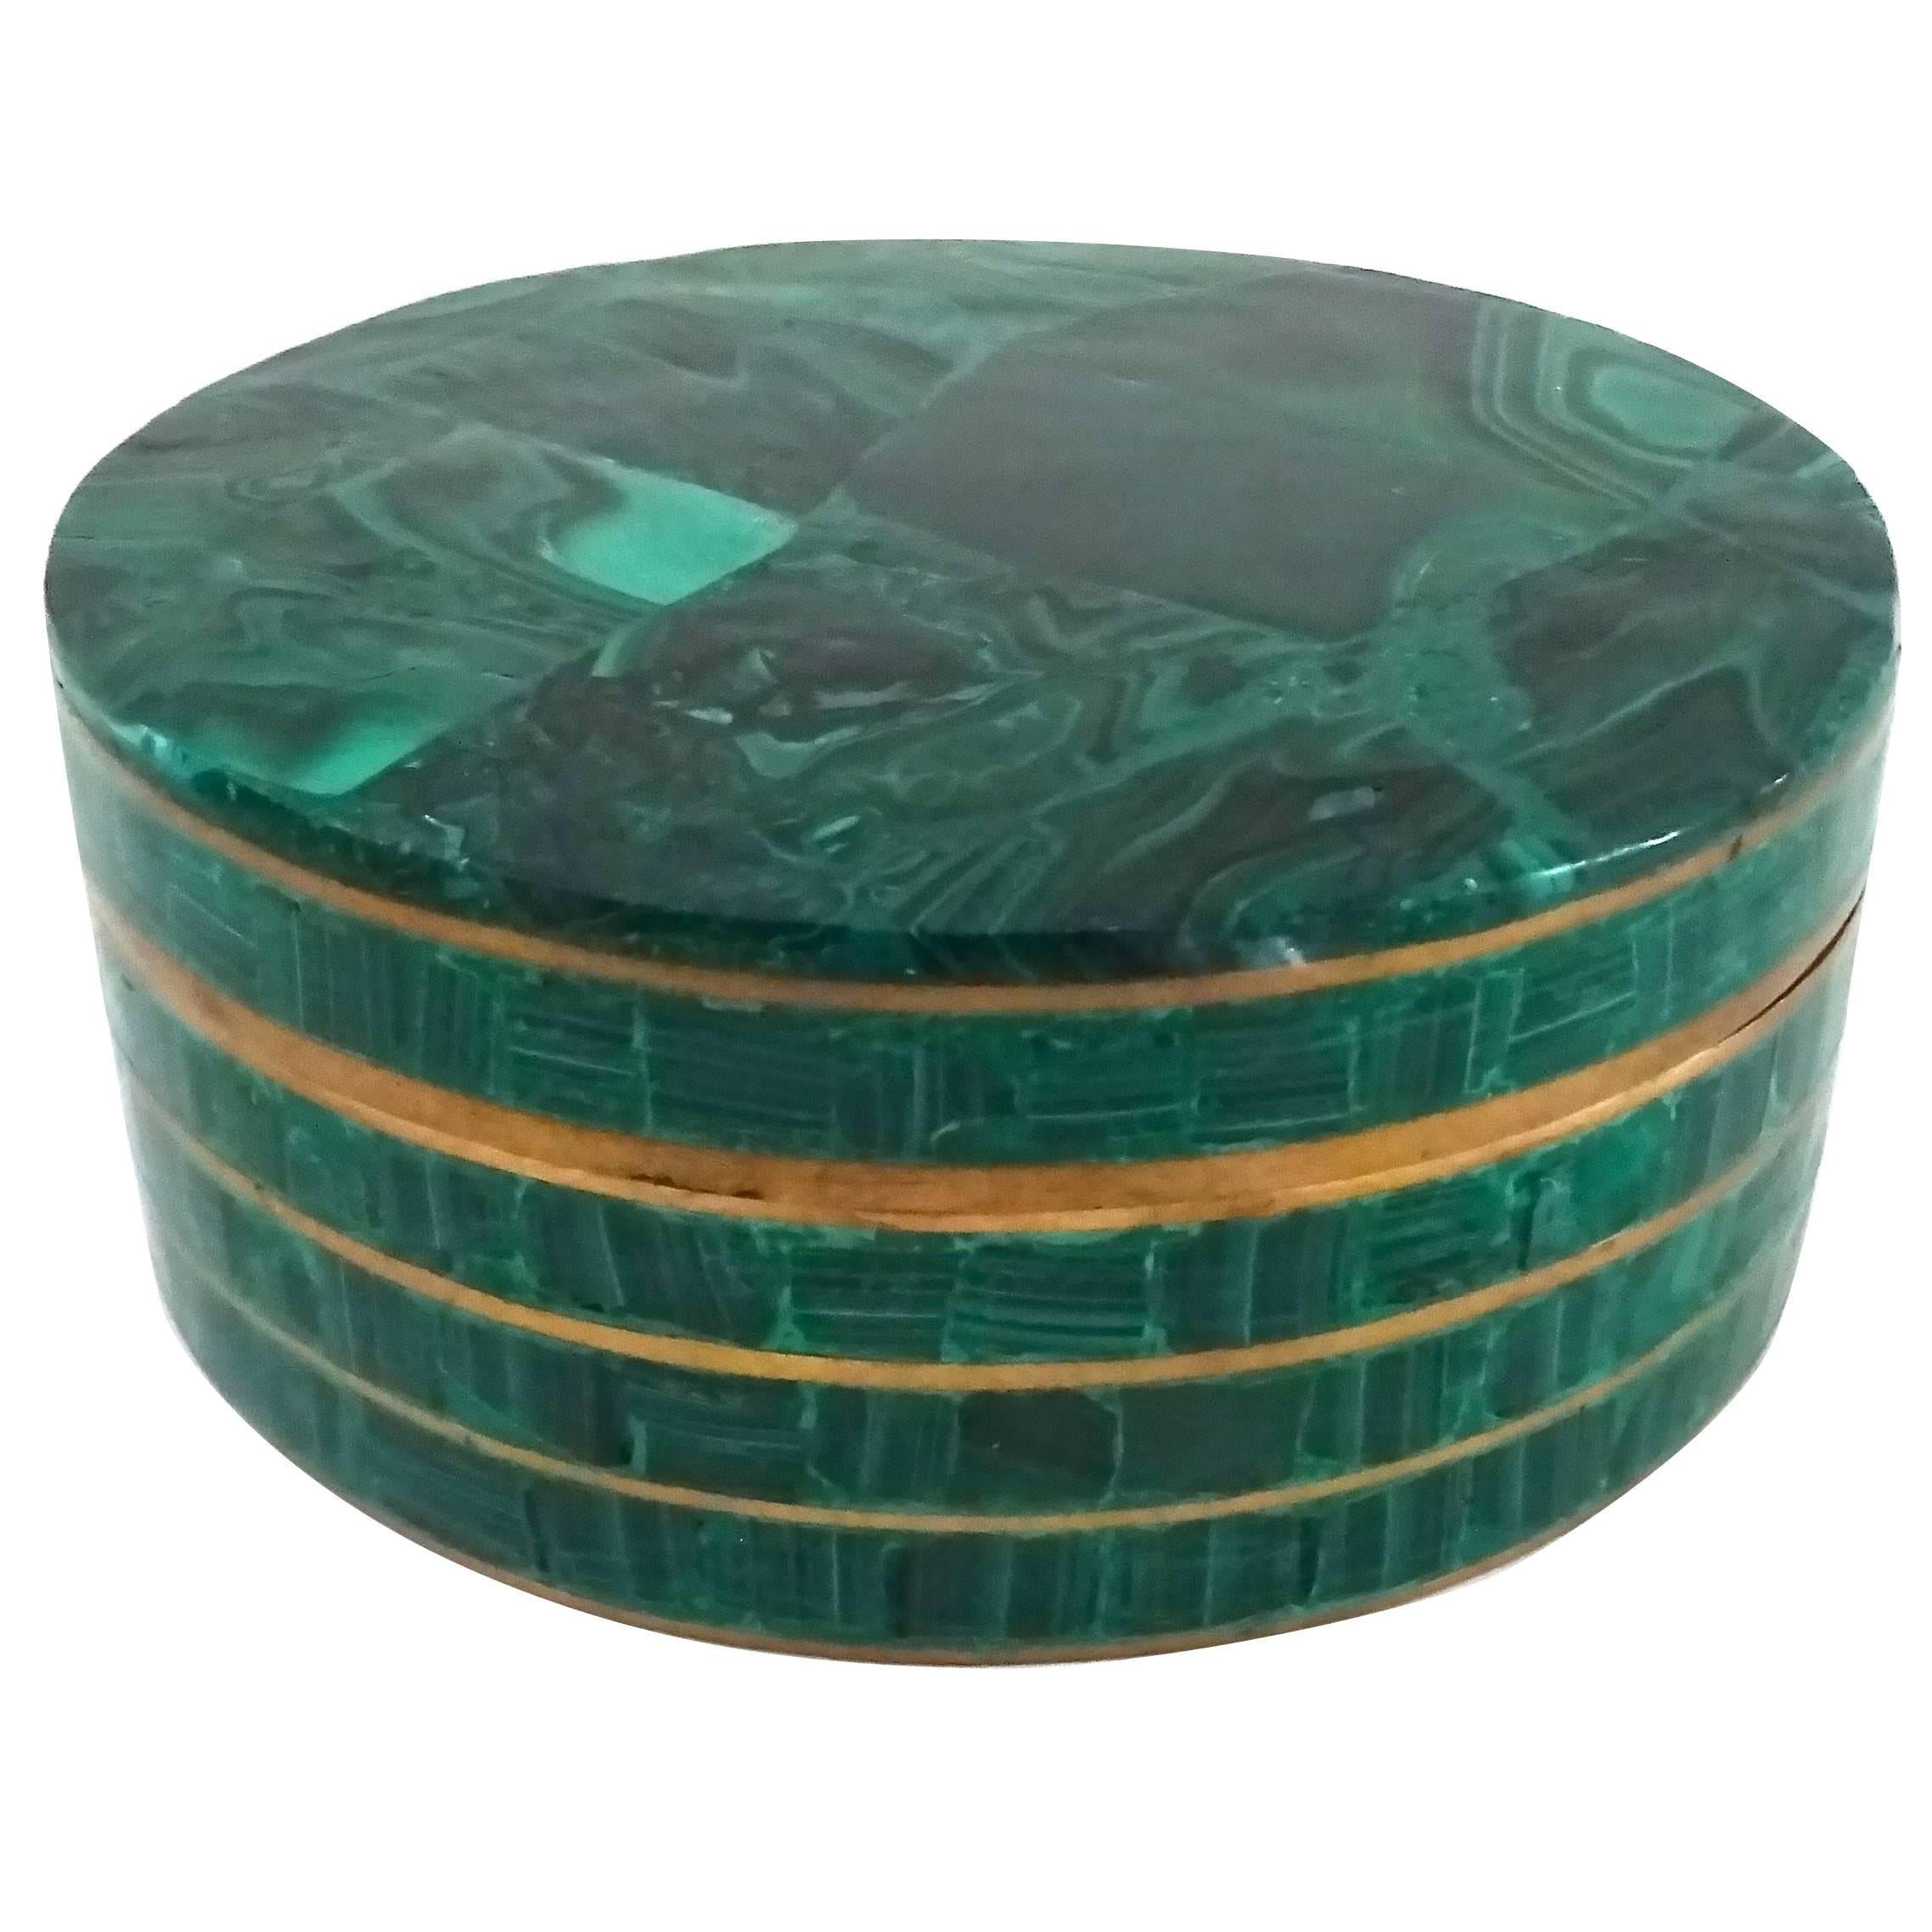 Chic 1950s Malachite and Brass Box For Sale